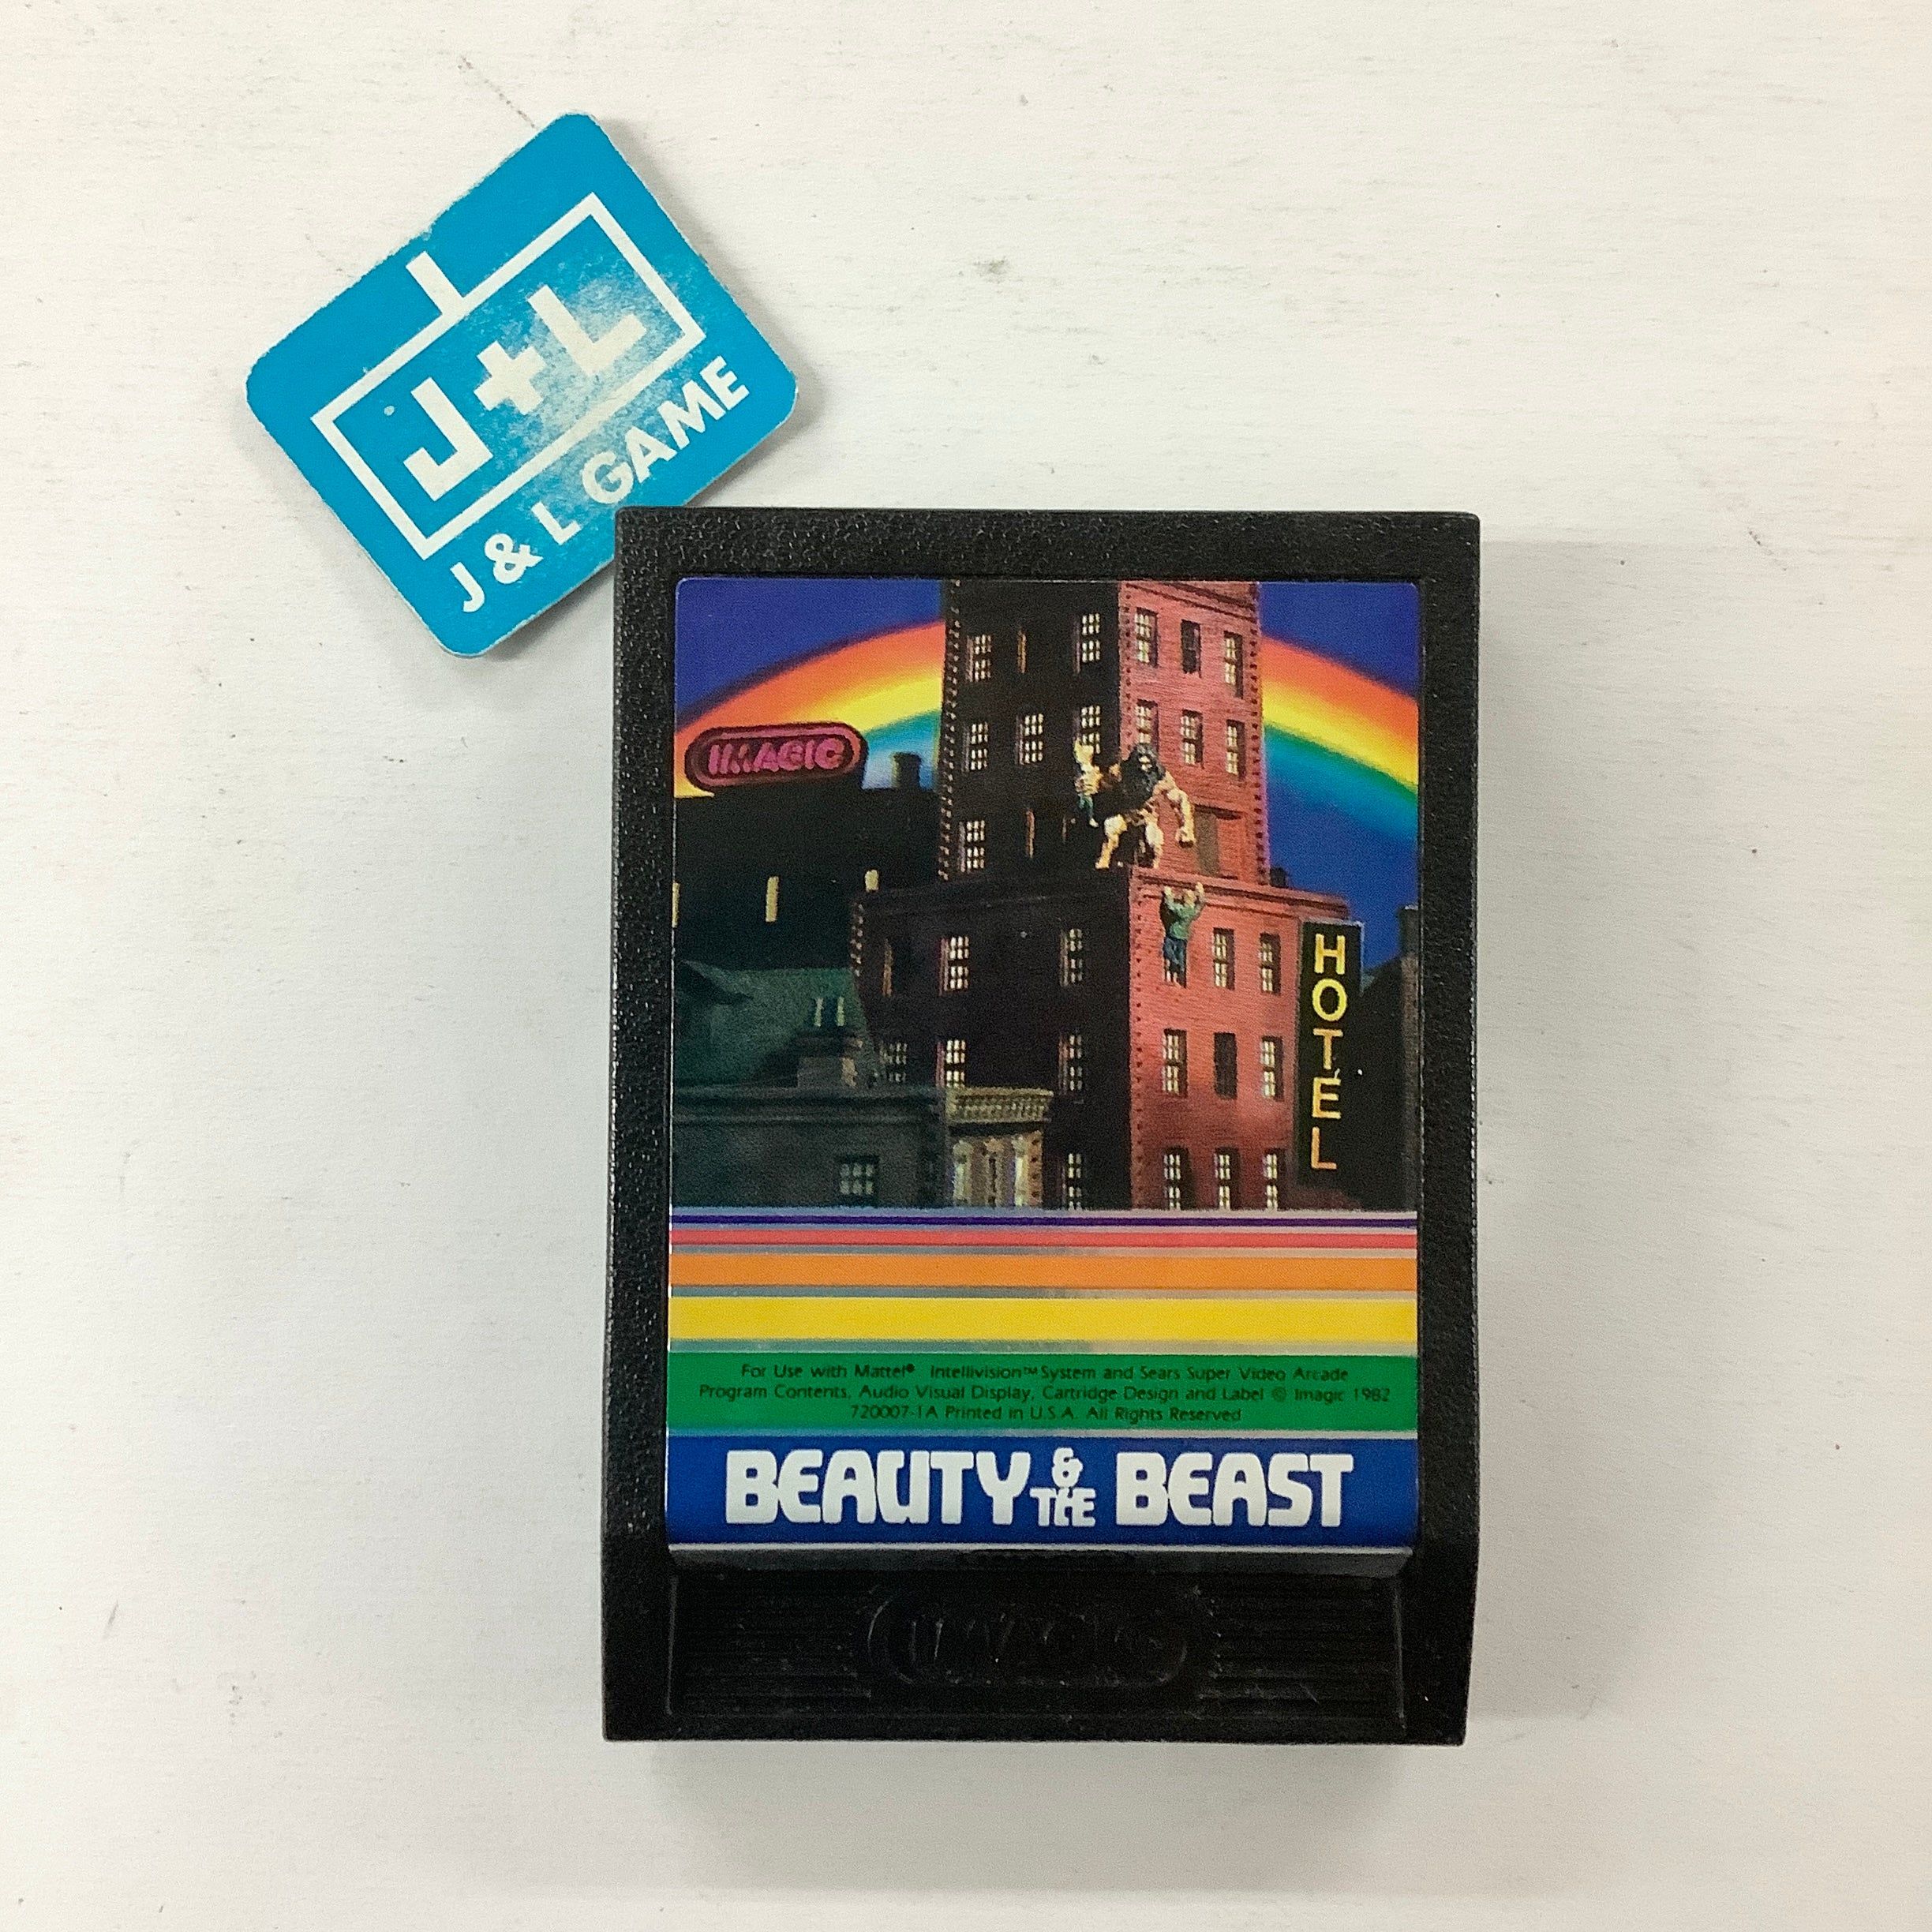 Beauty and the Beast - (INTV) Intellivision [Pre-Owned] Video Games iMagic   